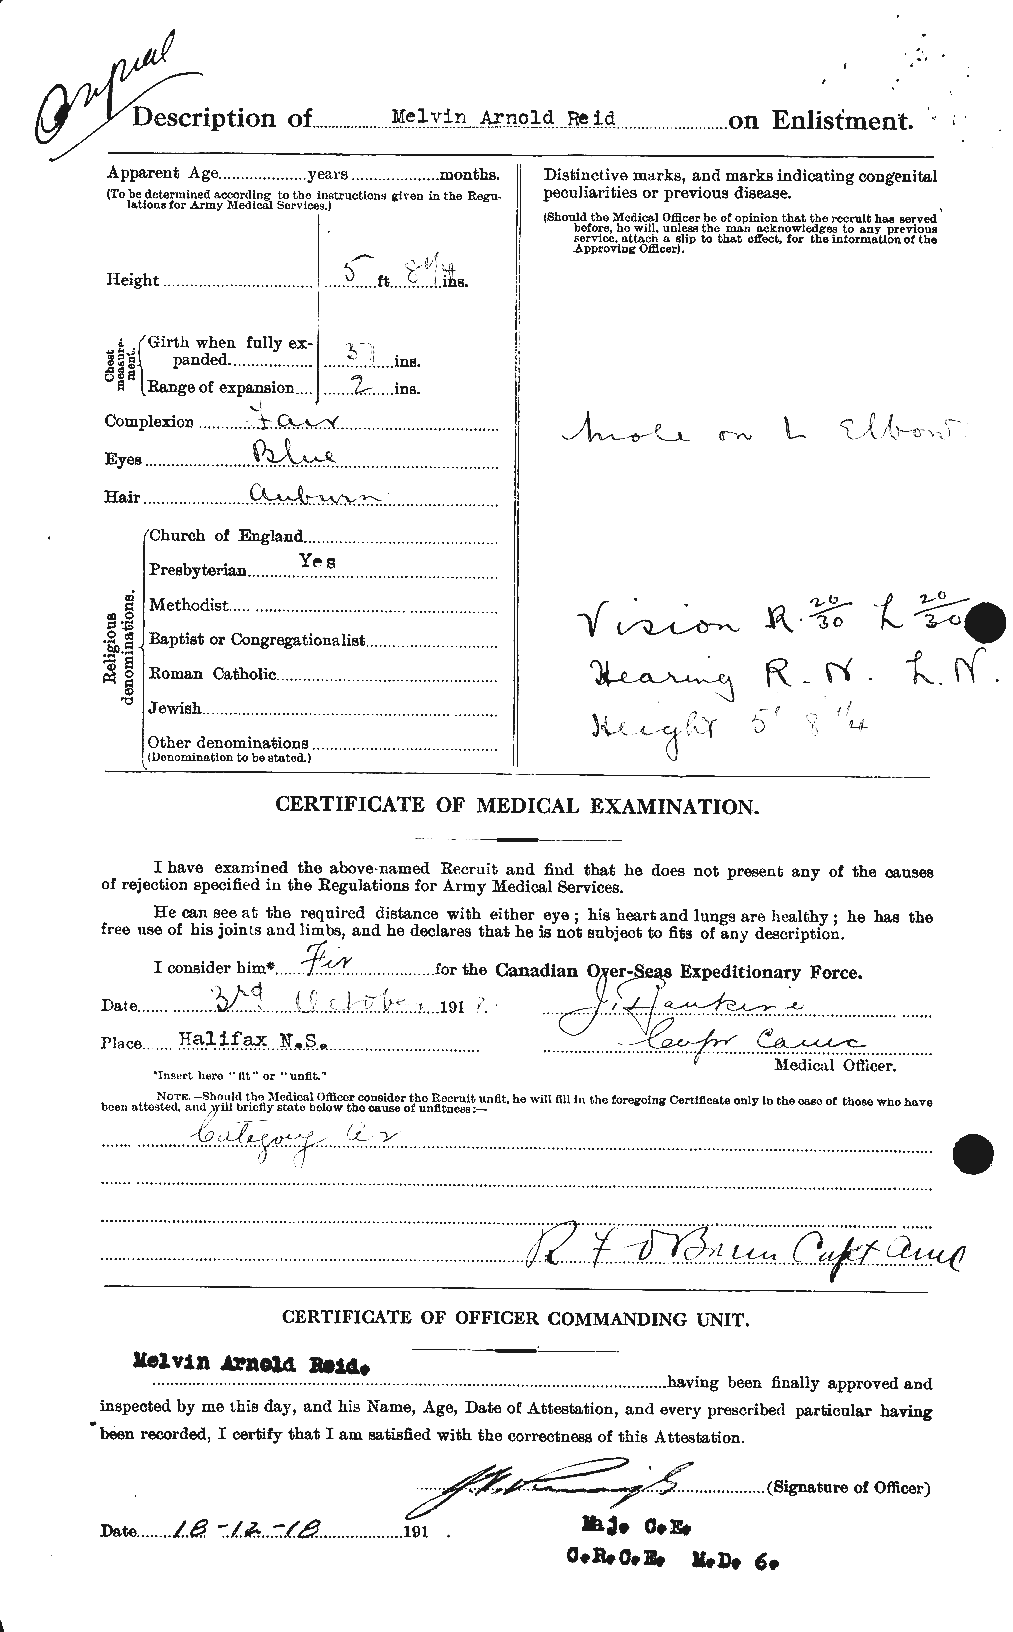 Personnel Records of the First World War - CEF 598951b